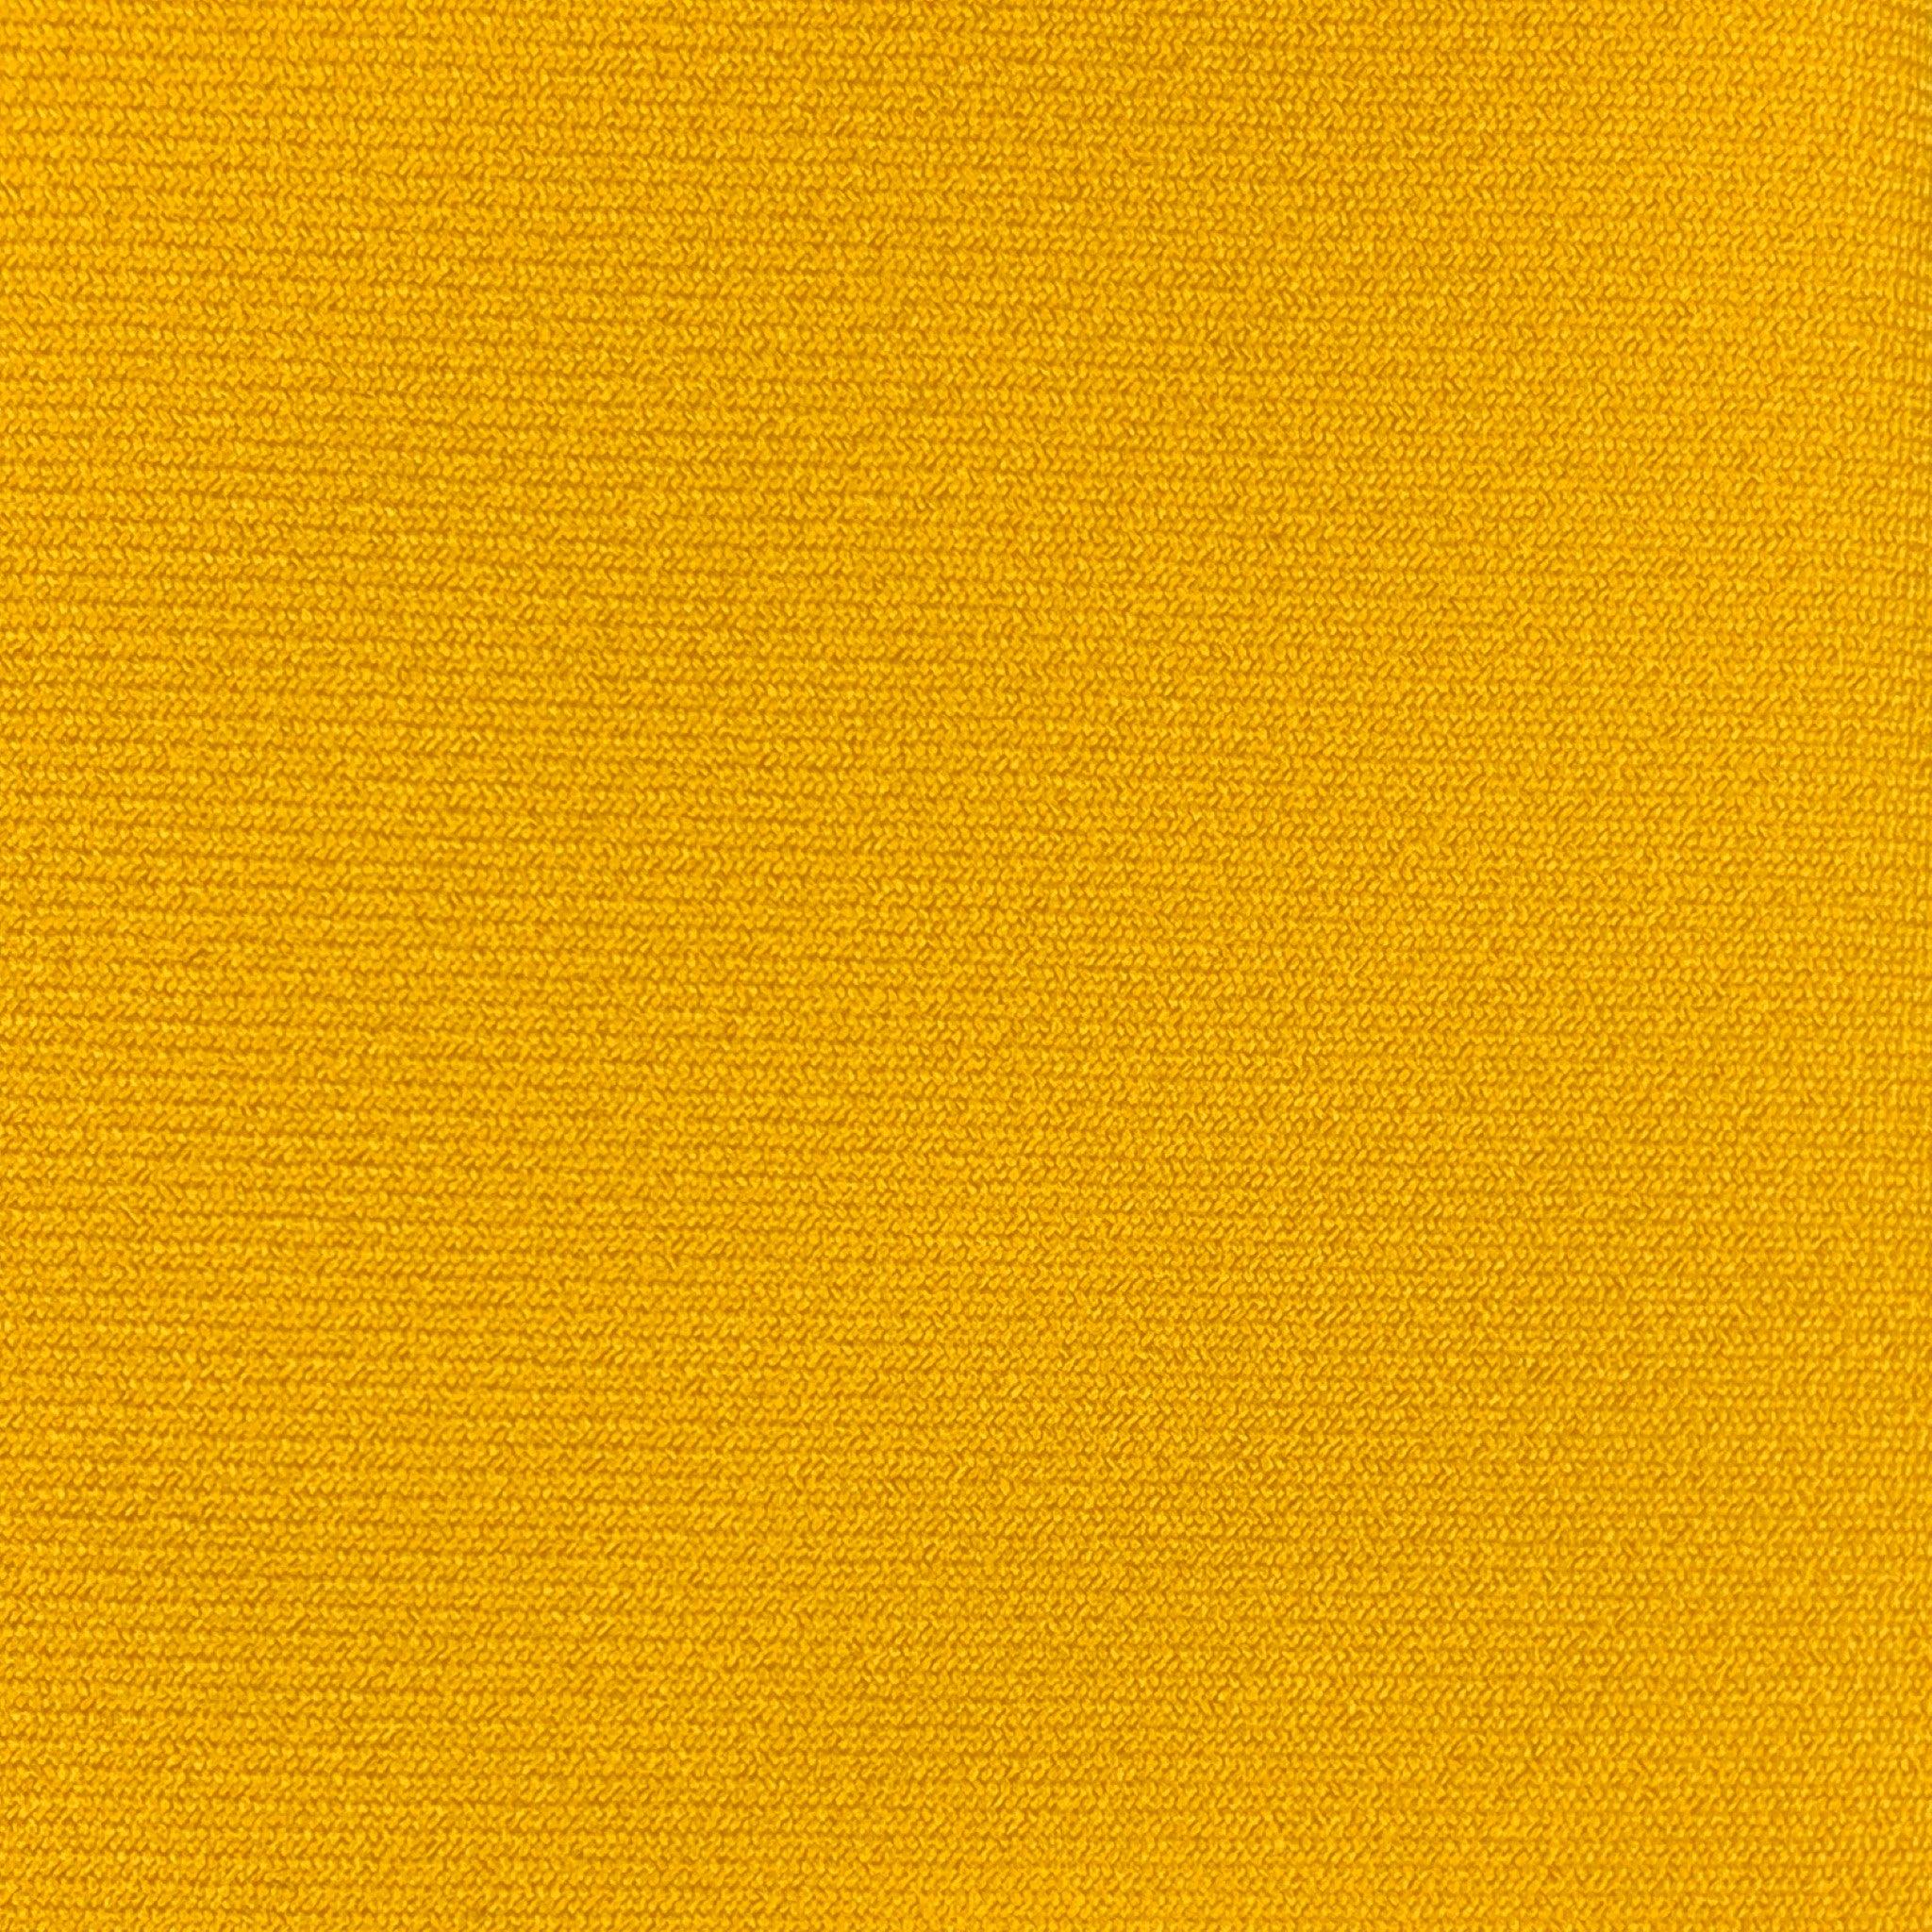 MARNI Yellow Polyester Tie In Good Condition For Sale In San Francisco, CA